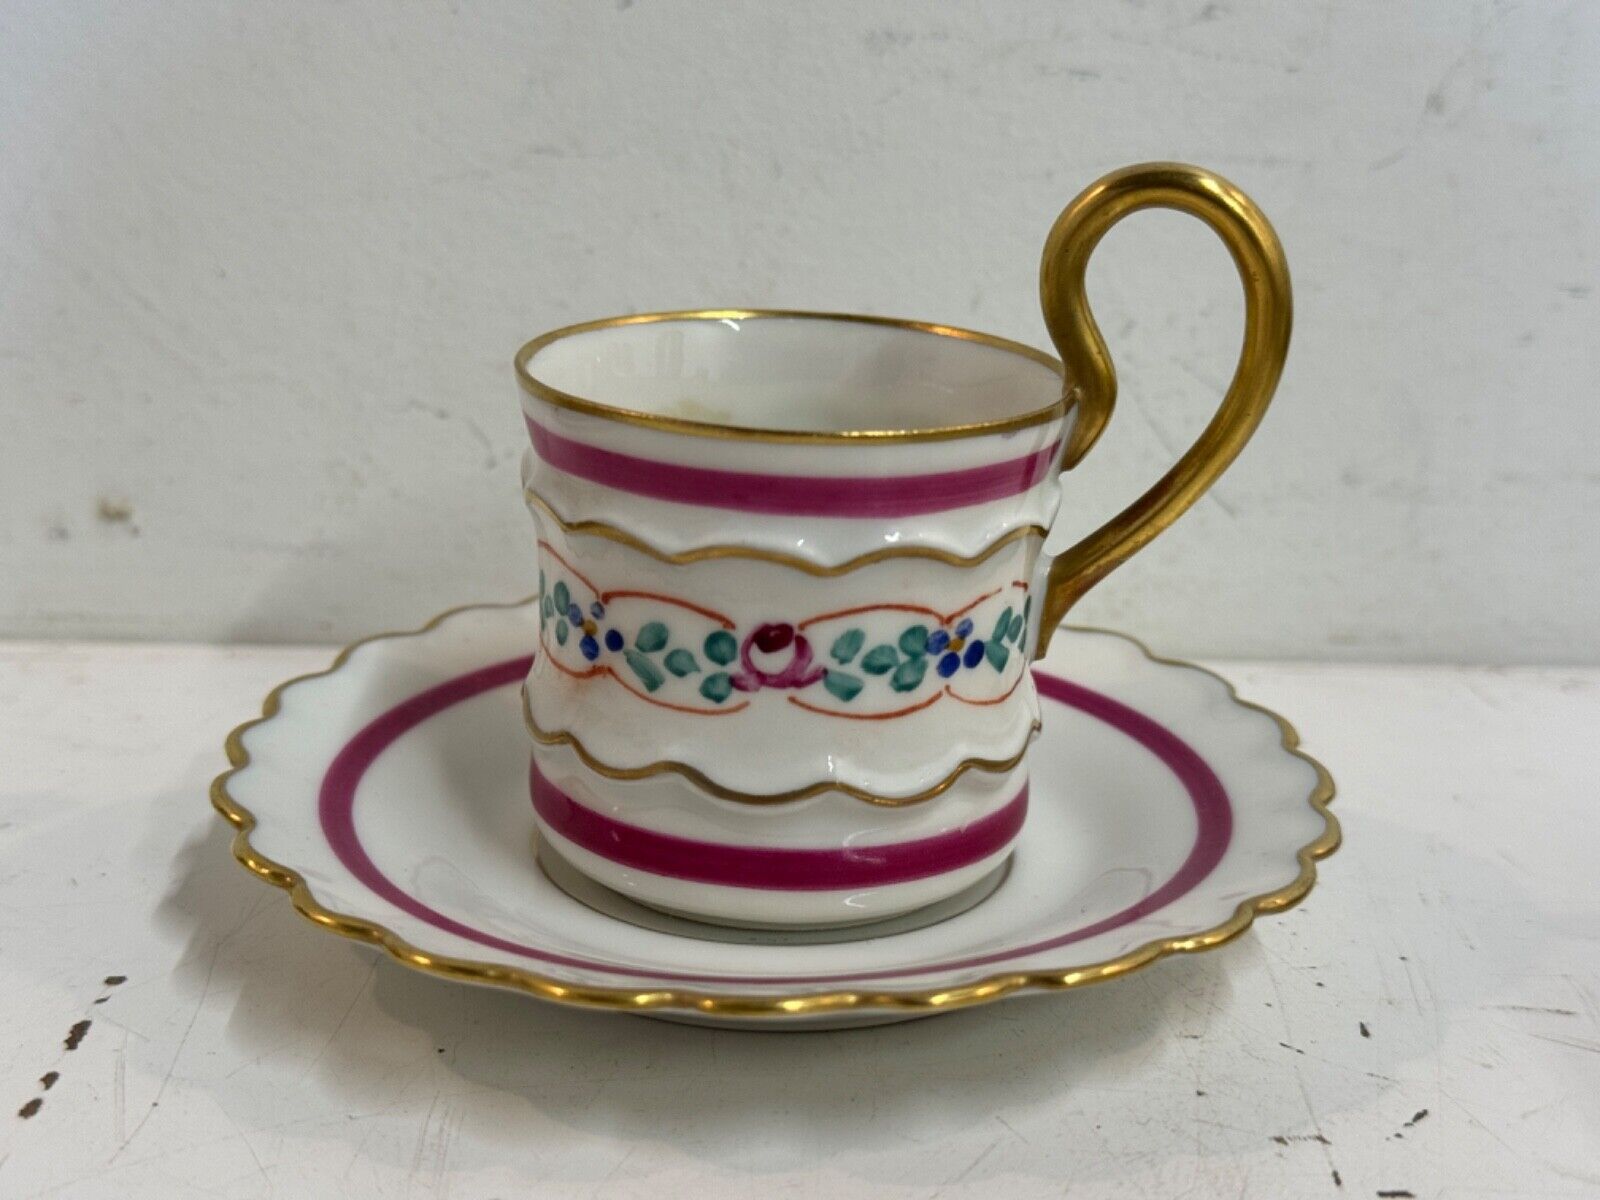 Vintage Imperial France Porcelain Cup and Saucer Hand Painted Floral Decorations